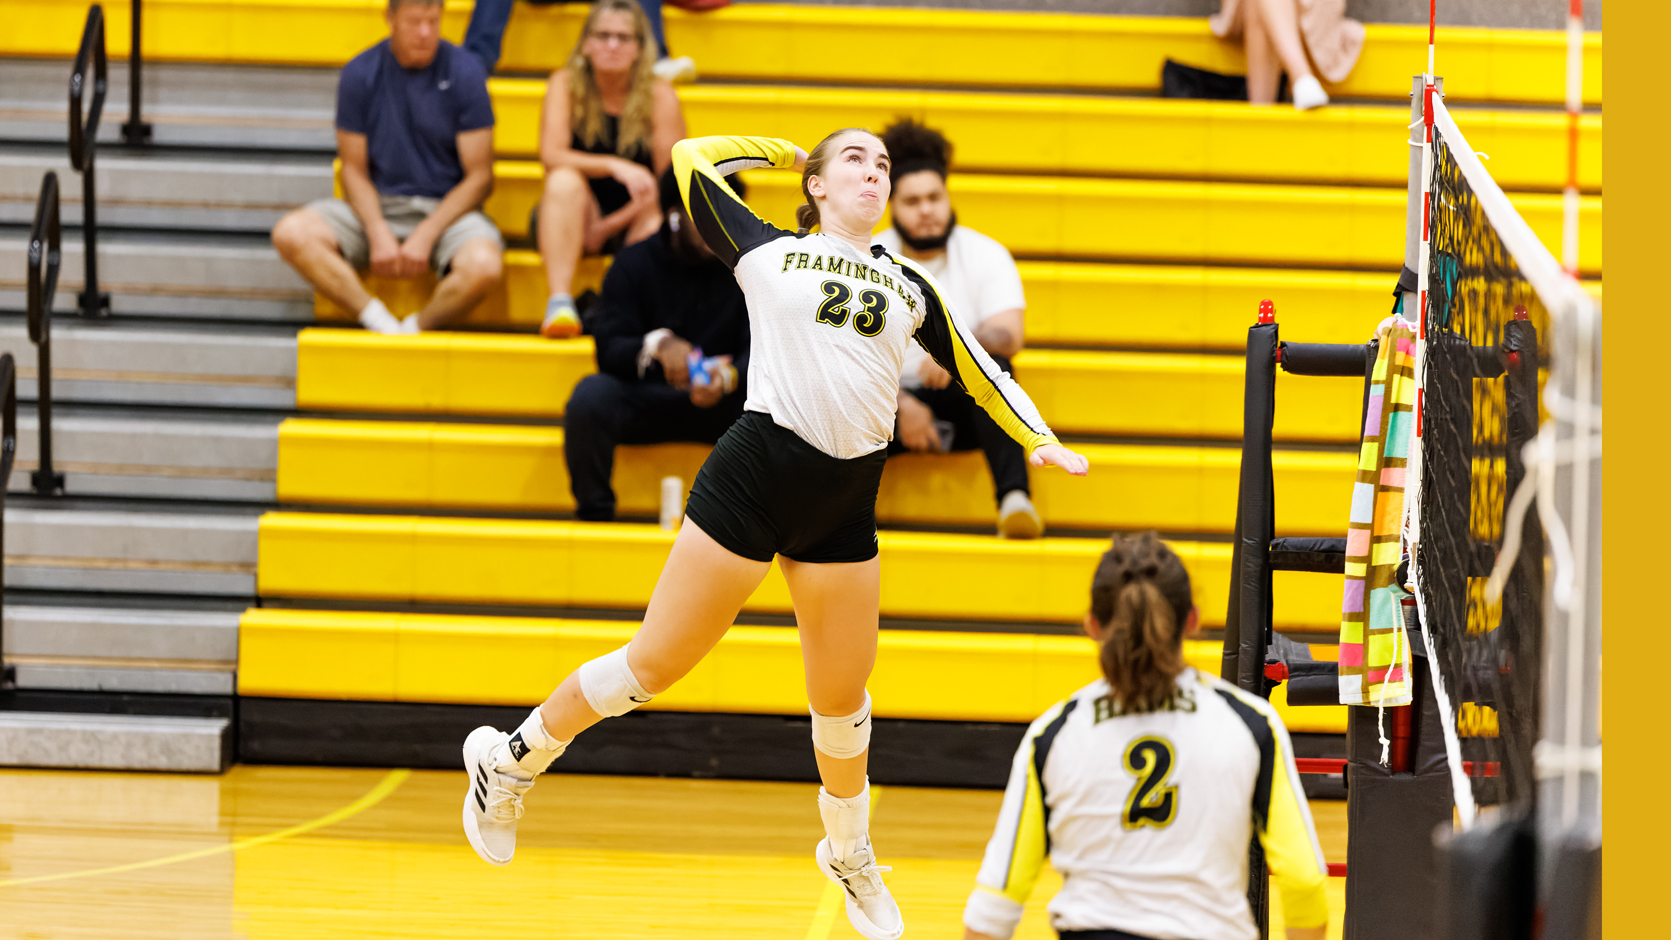 Szymanski Named MASCAC Volleyball Offensive Player of the Week